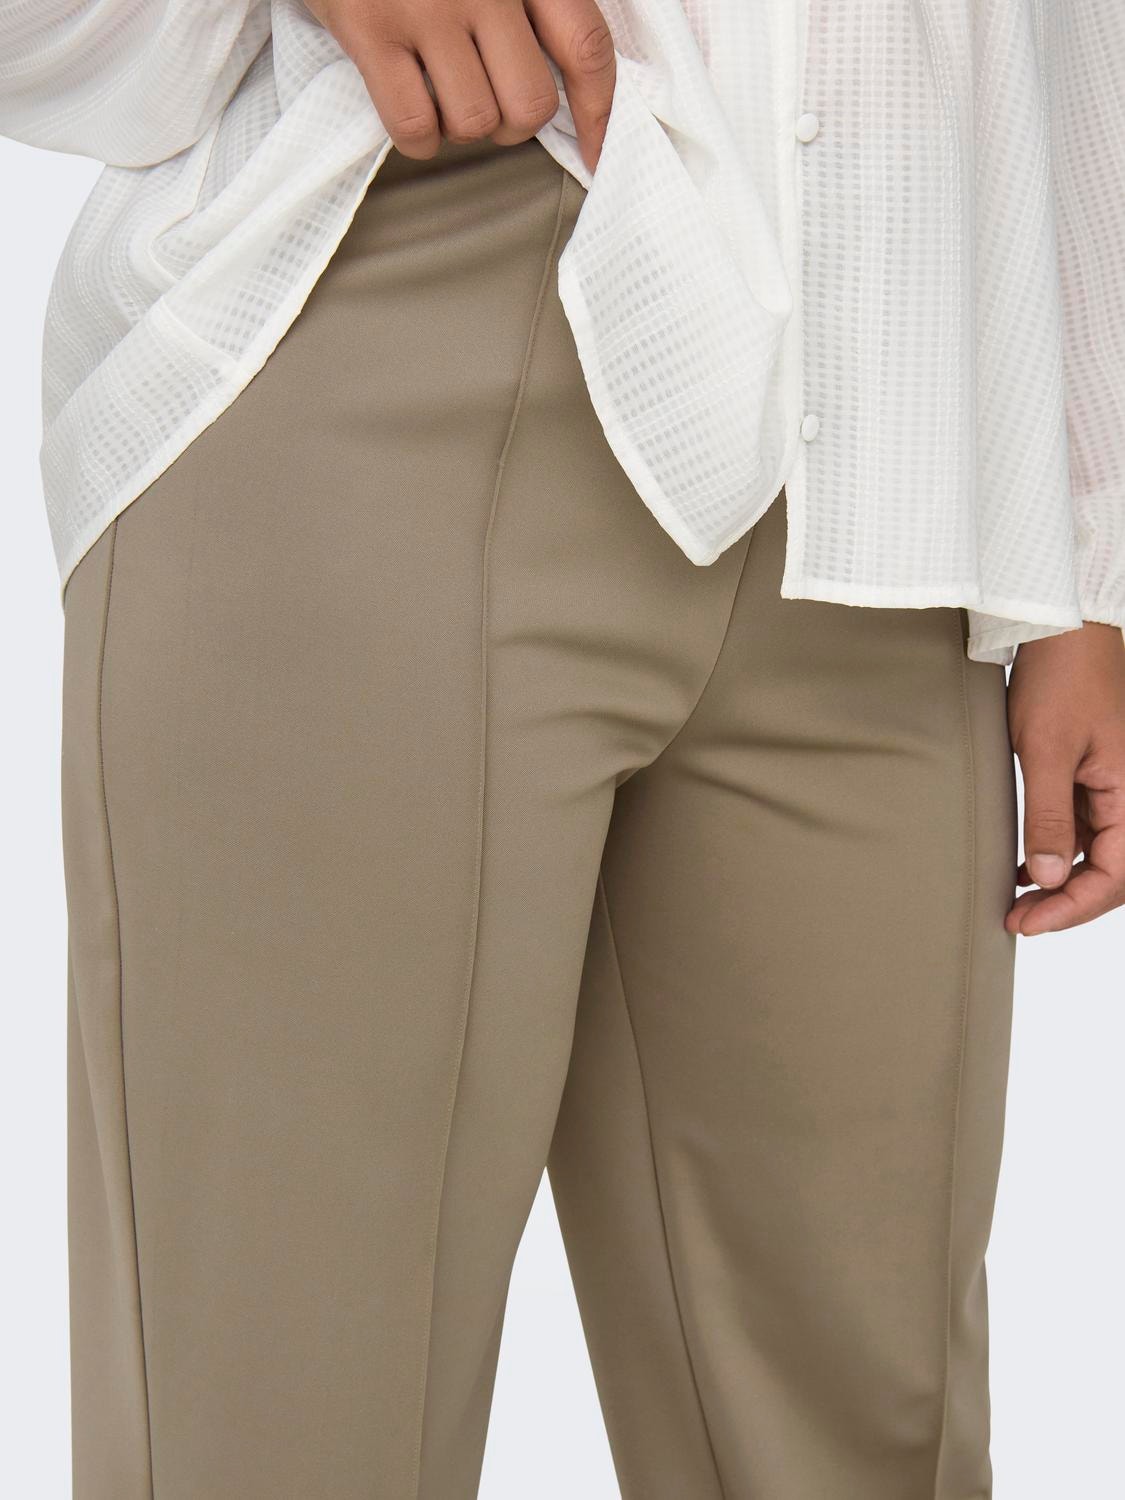 ONLY Curvy trousers with high waist -Weathered Teak - 15312009